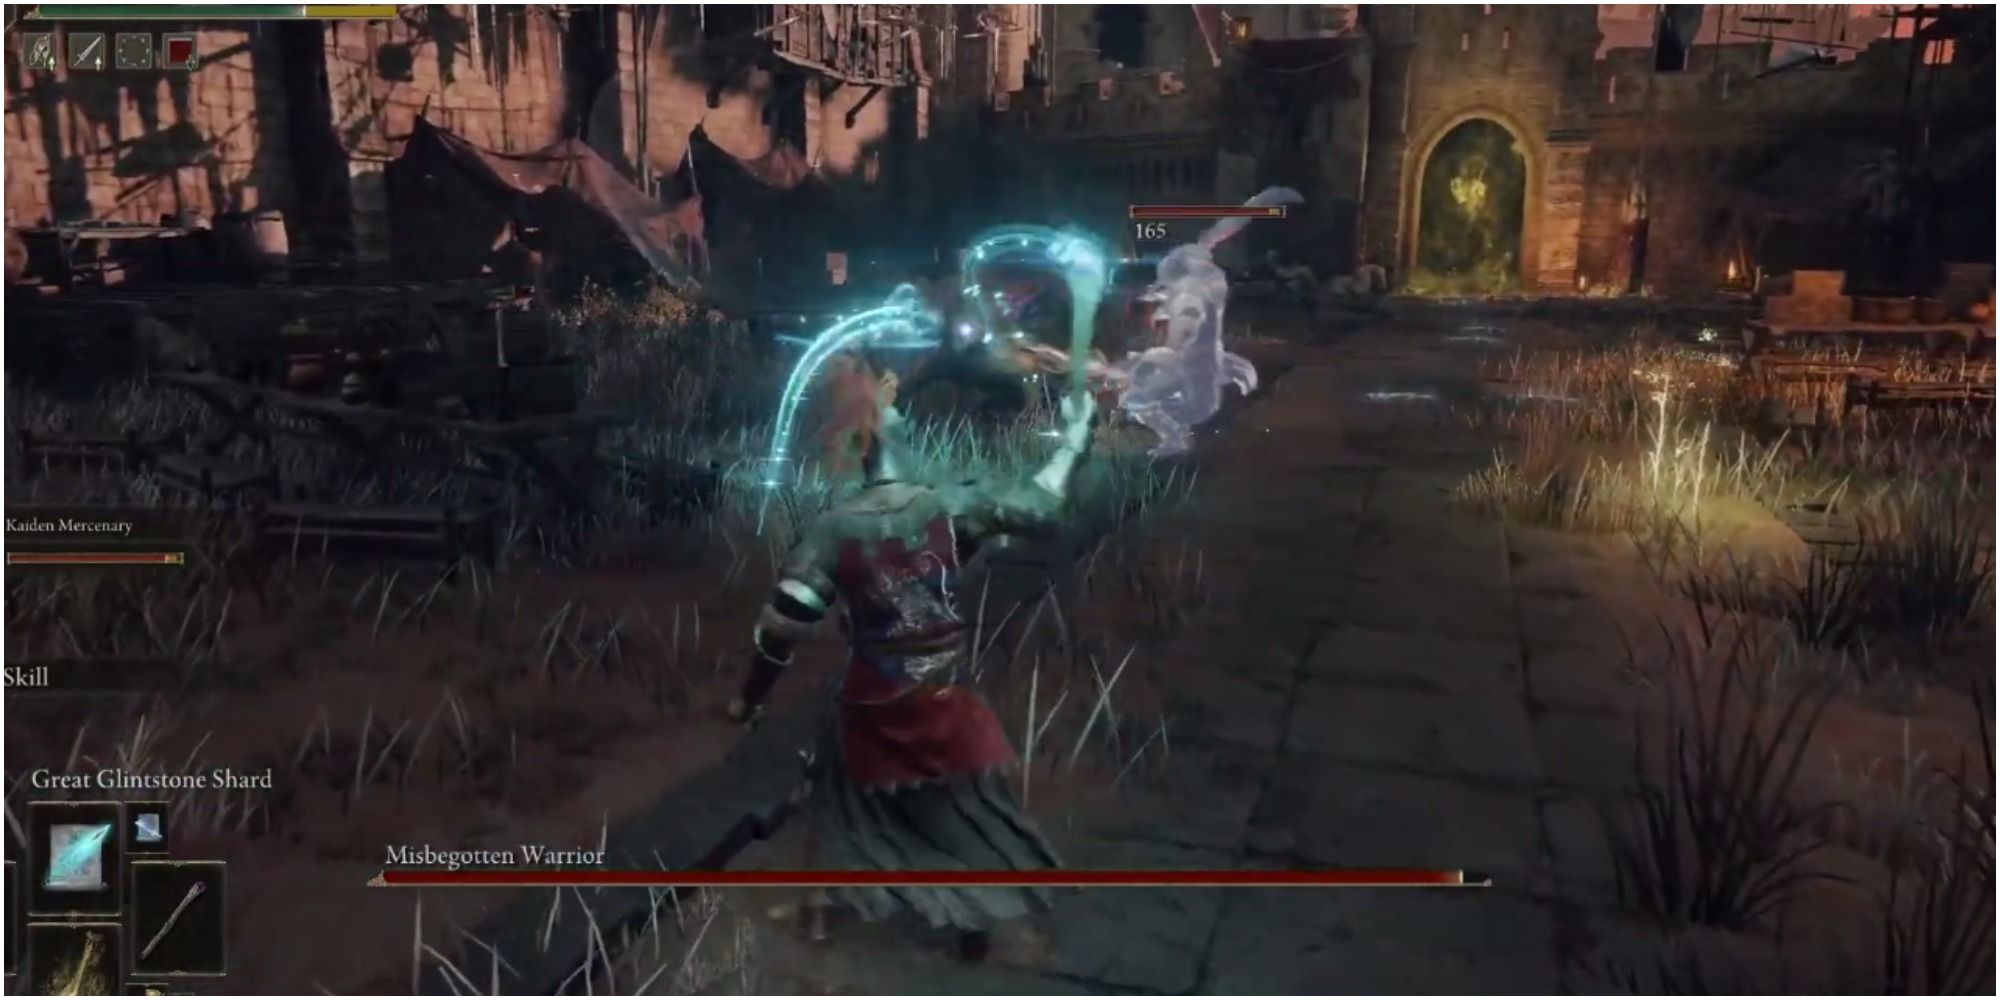 The player using Sorcery to attack the boss.